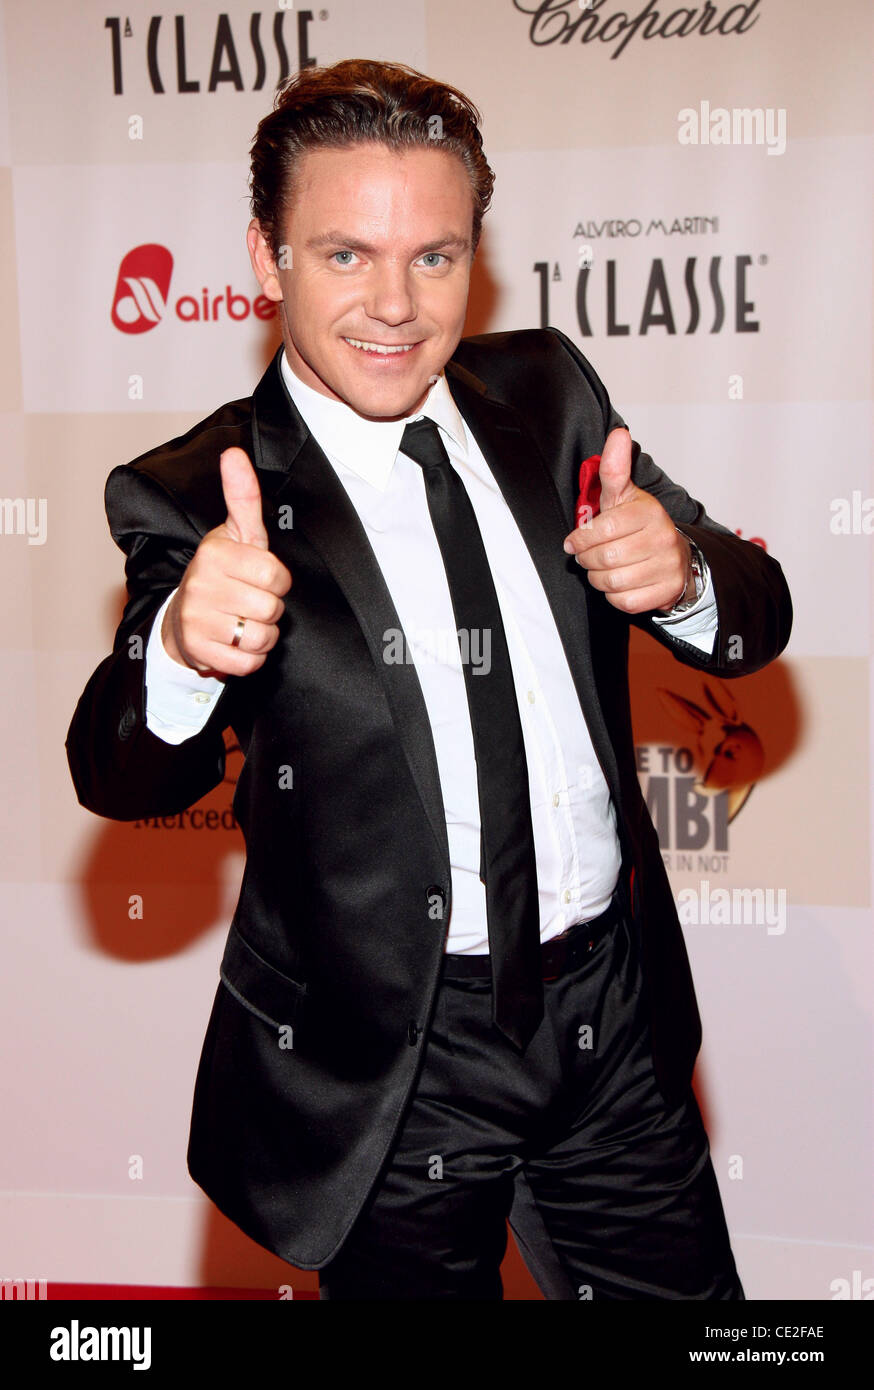 Stefan Mross at Tribute To Bambi gala at The Station. Berlin, Germany - 14.10.2010 Stock Photo